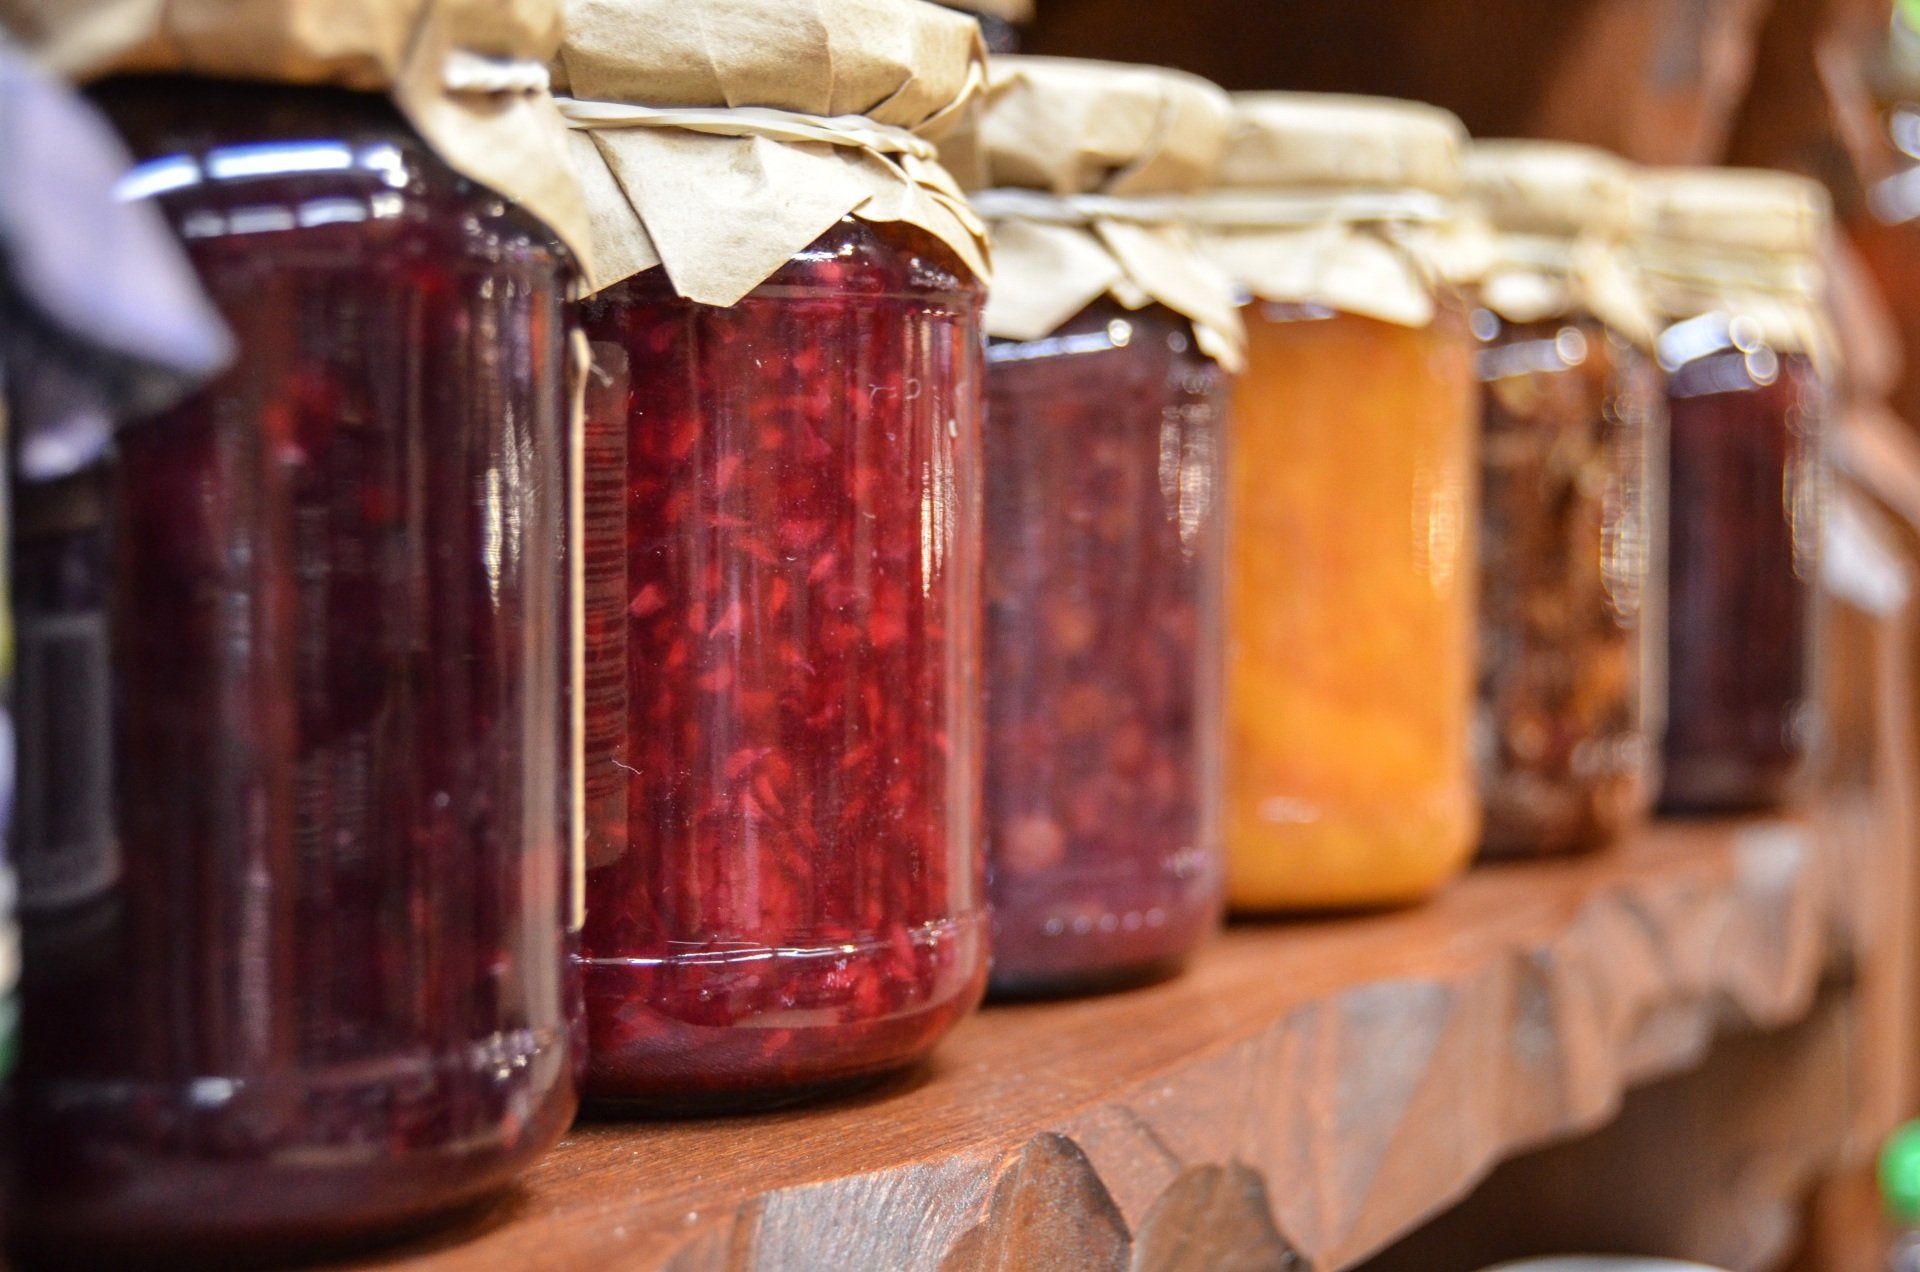 A row of jars of jam are lined up on a wooden shelf.